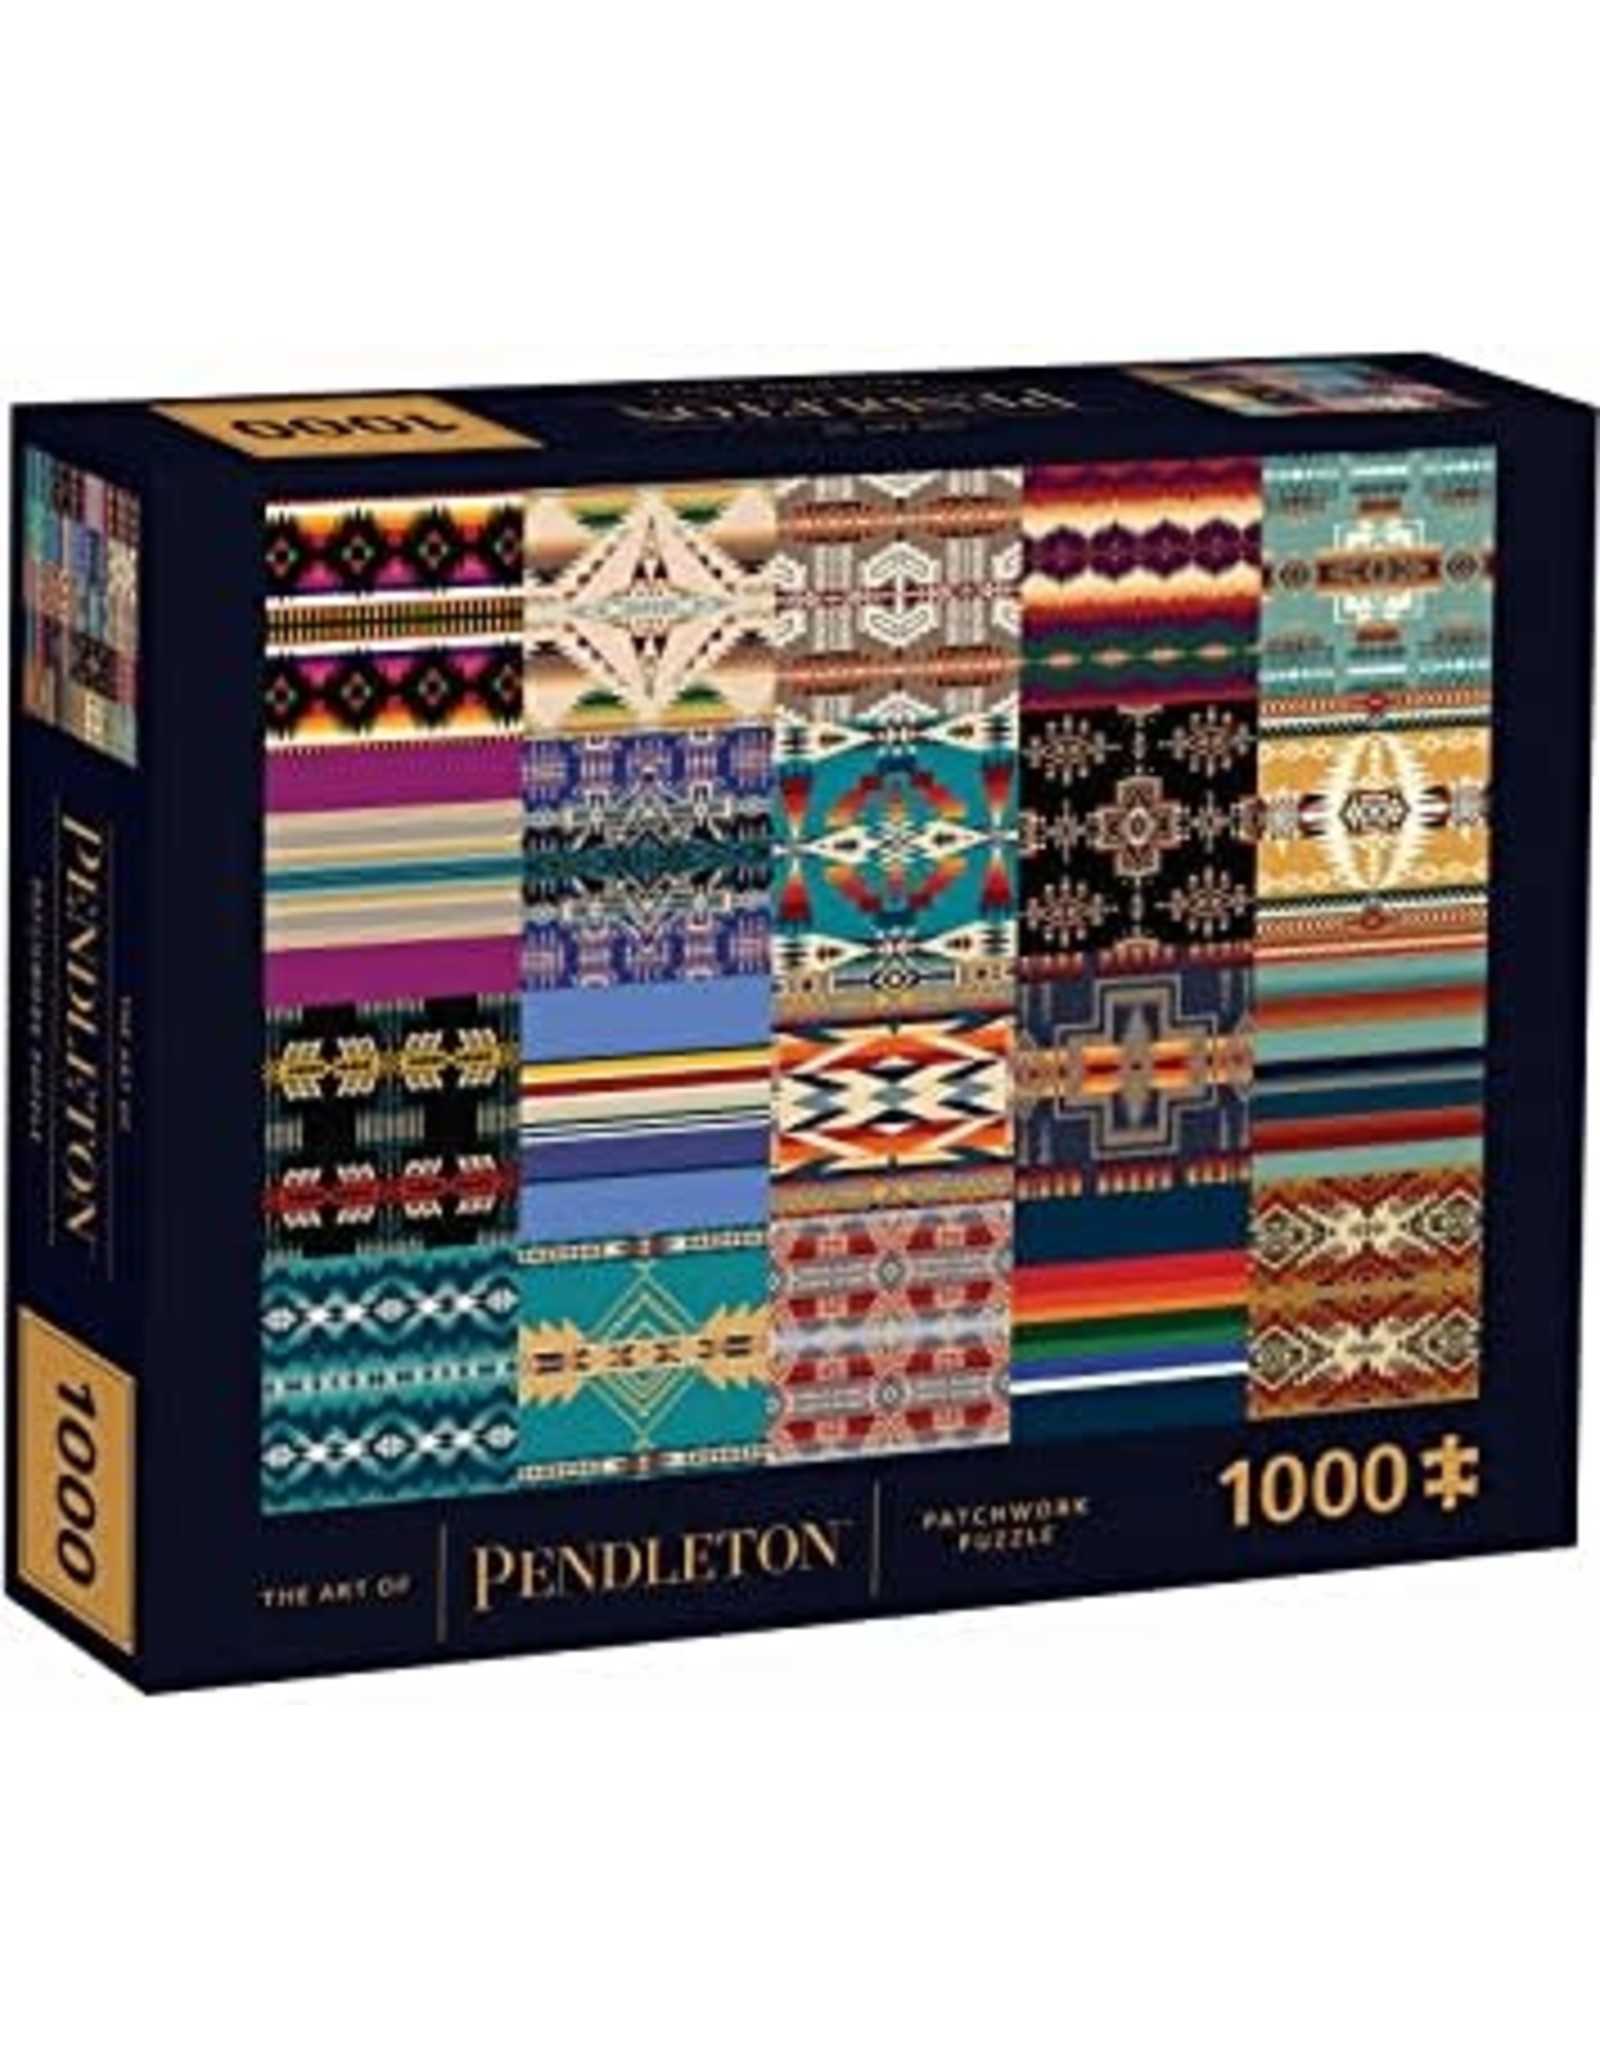 The Art of Pendleton Patchwork 1000pc Jigsaw Puzzle